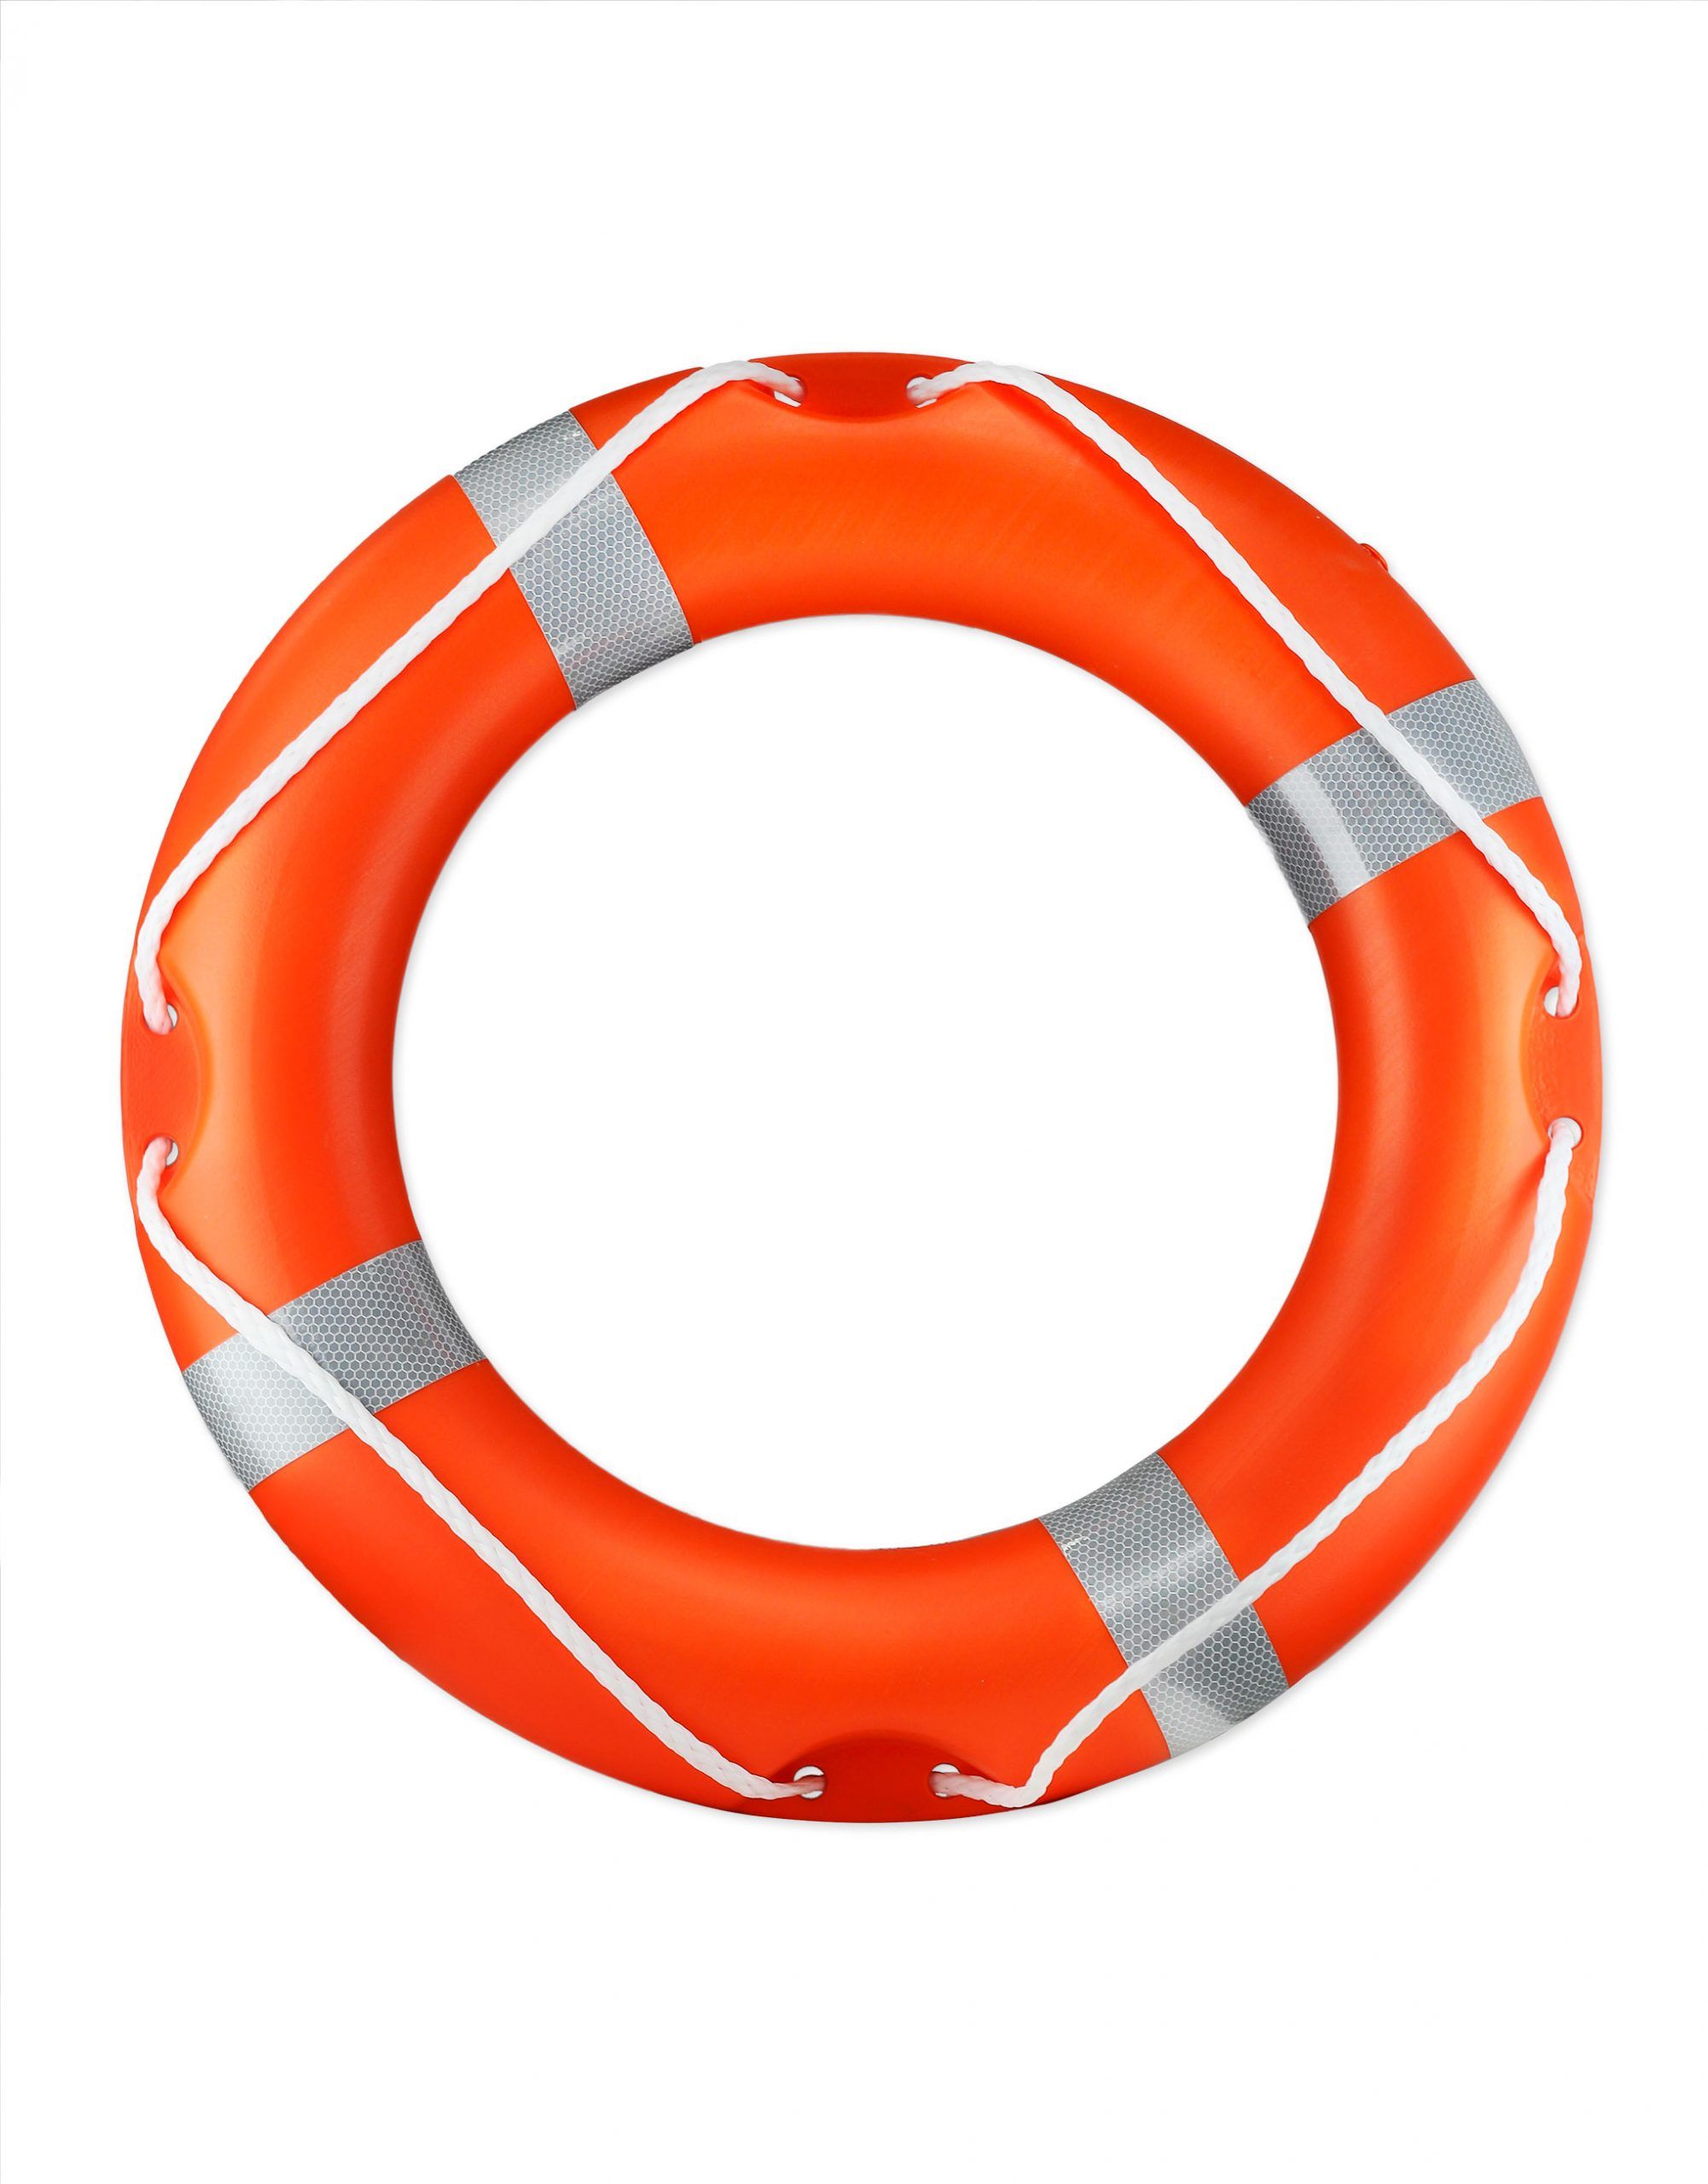 Photo of a Life Ring Buoy